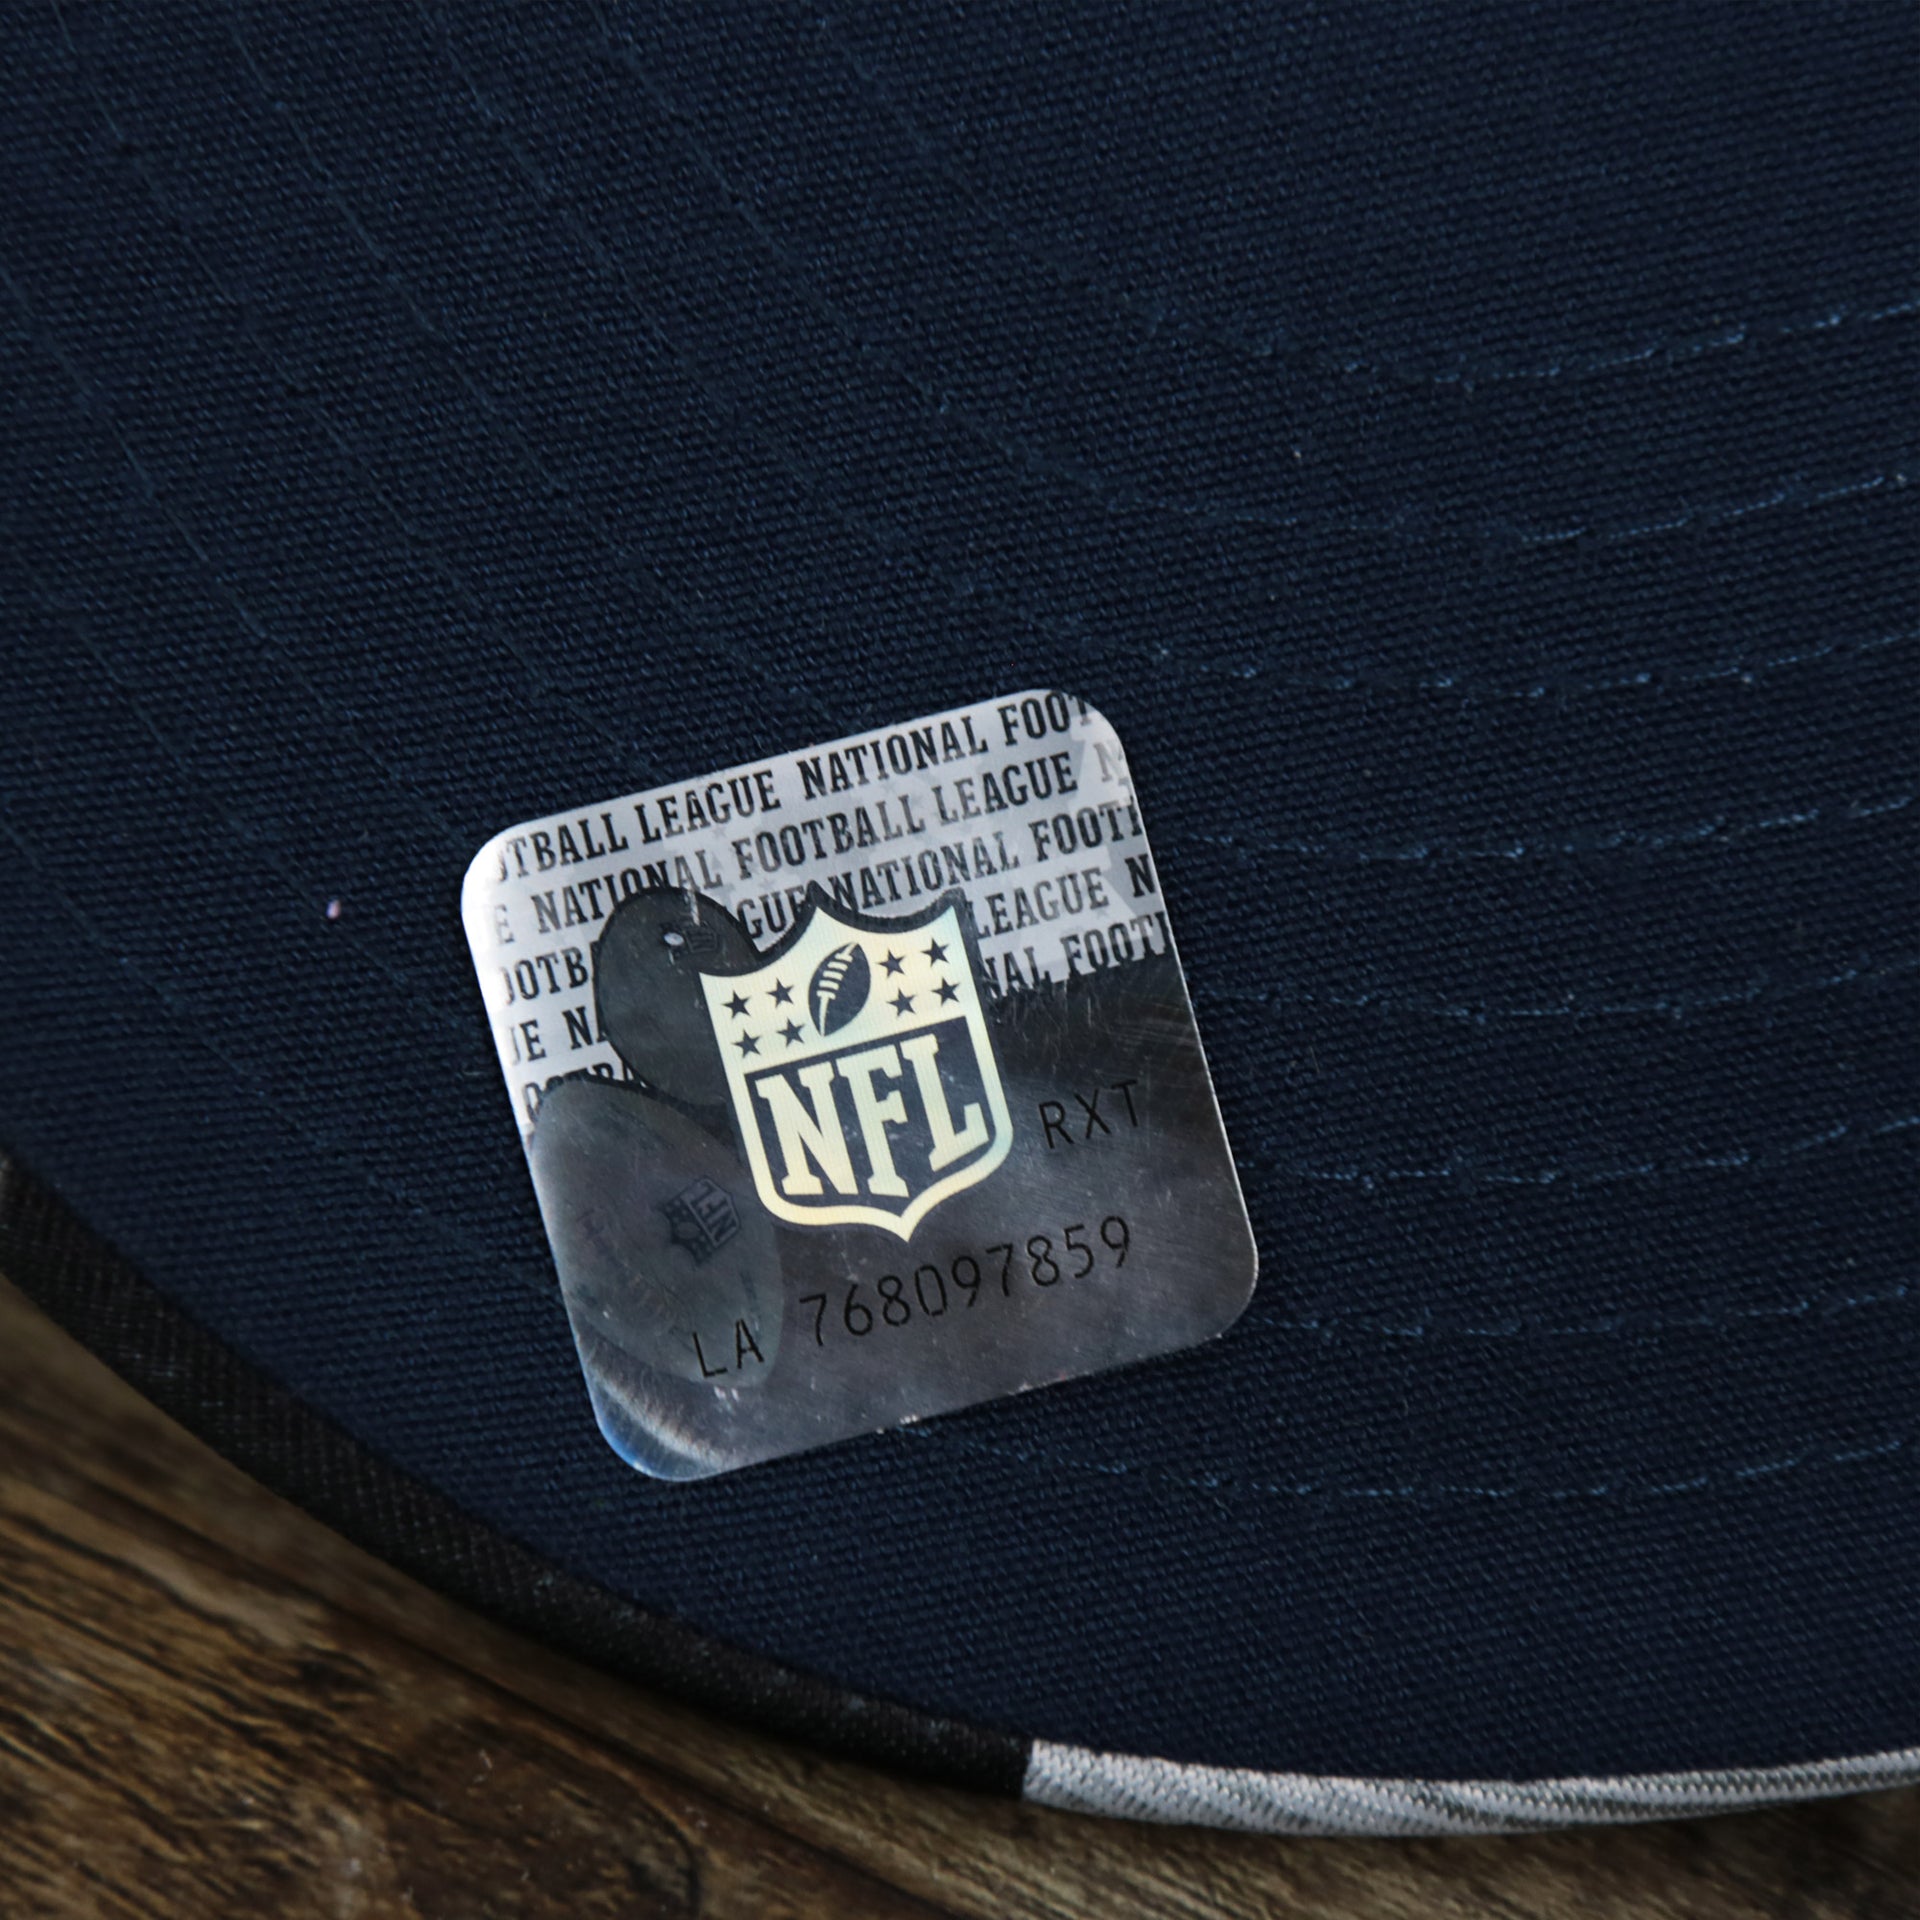 The NFL Sticker on theNew England Patriots NFL OnField Summer Training 2022 Camo 9Fifty Snapback | Navy Blue Camo 9Fifty